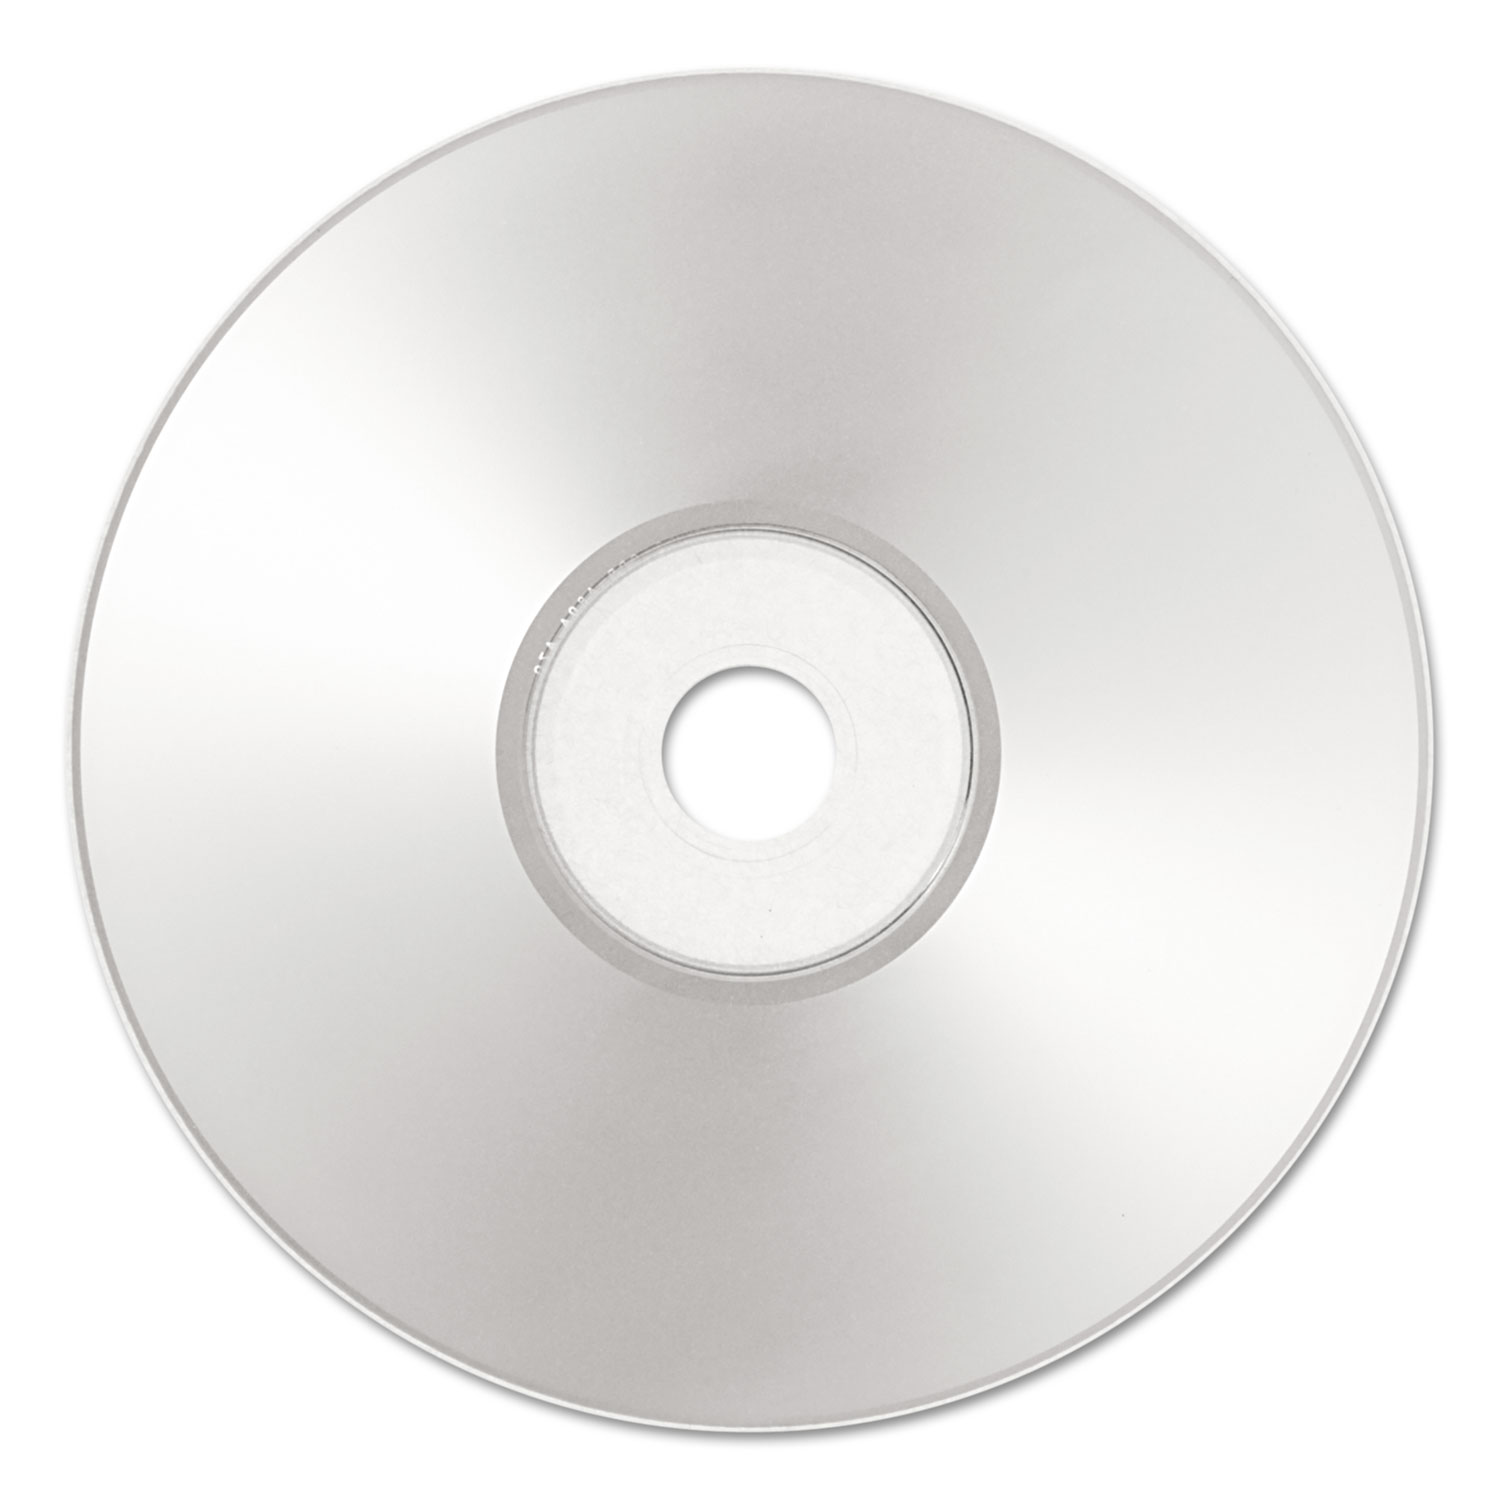 CD-R Discs, Printable, 700MB/80min, 52x, Spindle, Silver, 50/Pack